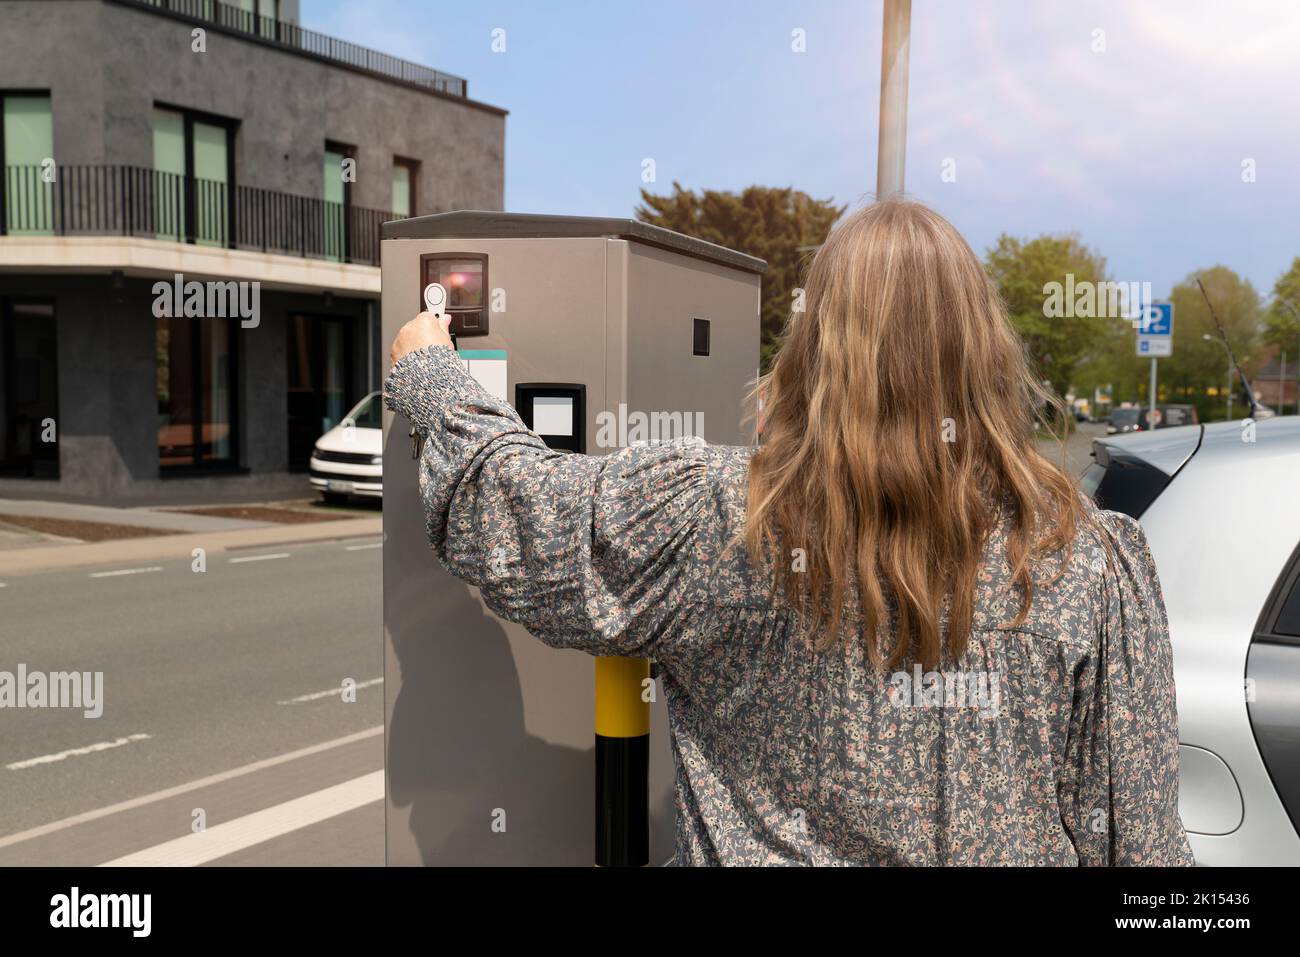 A woman is standing at an e car charging station. She is making a contactless payment. In the background is a street with traffic. Stock Photo